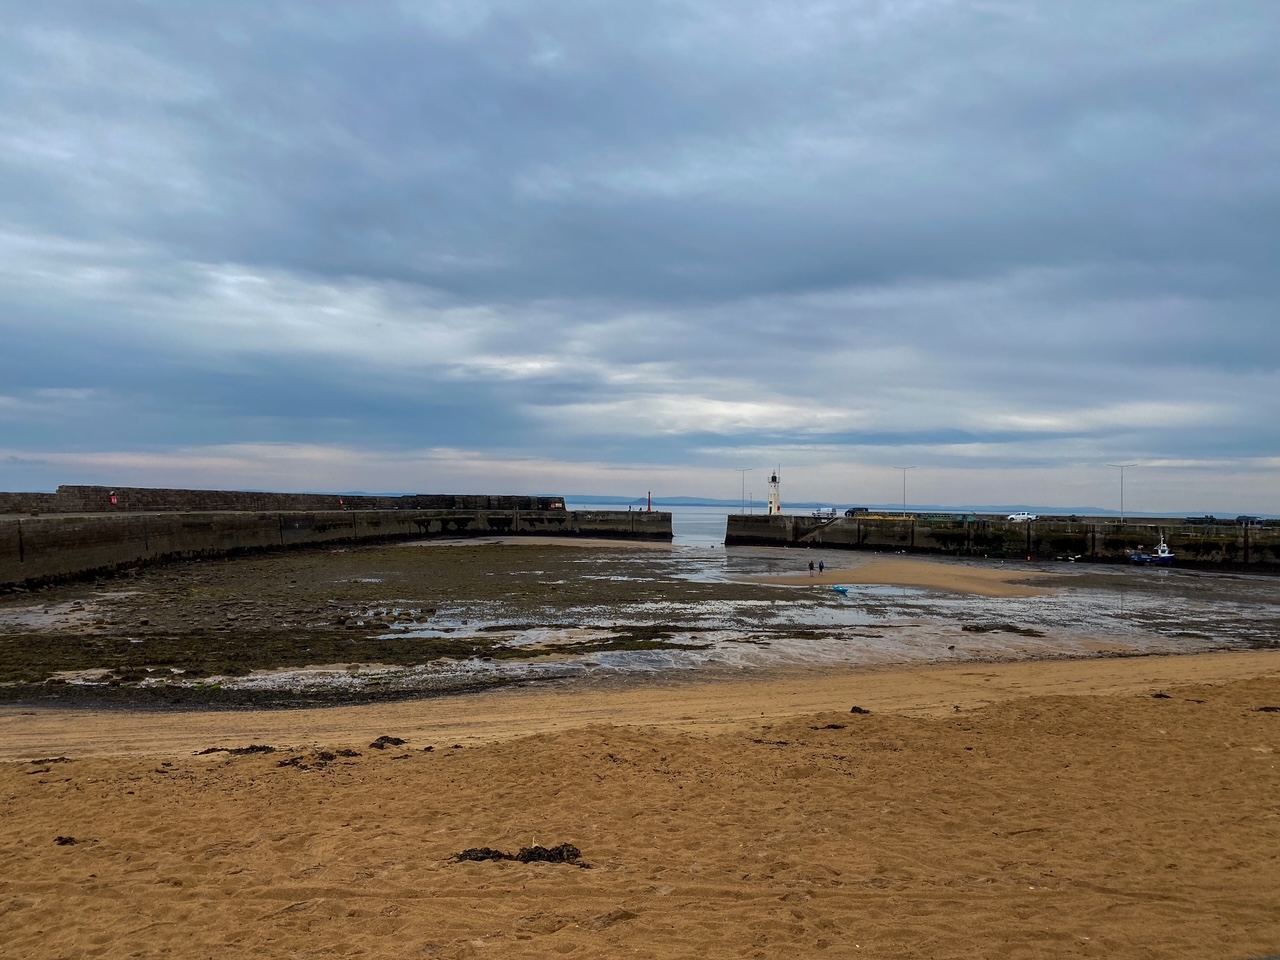 Anstruther, a charming coastal town in Scotland